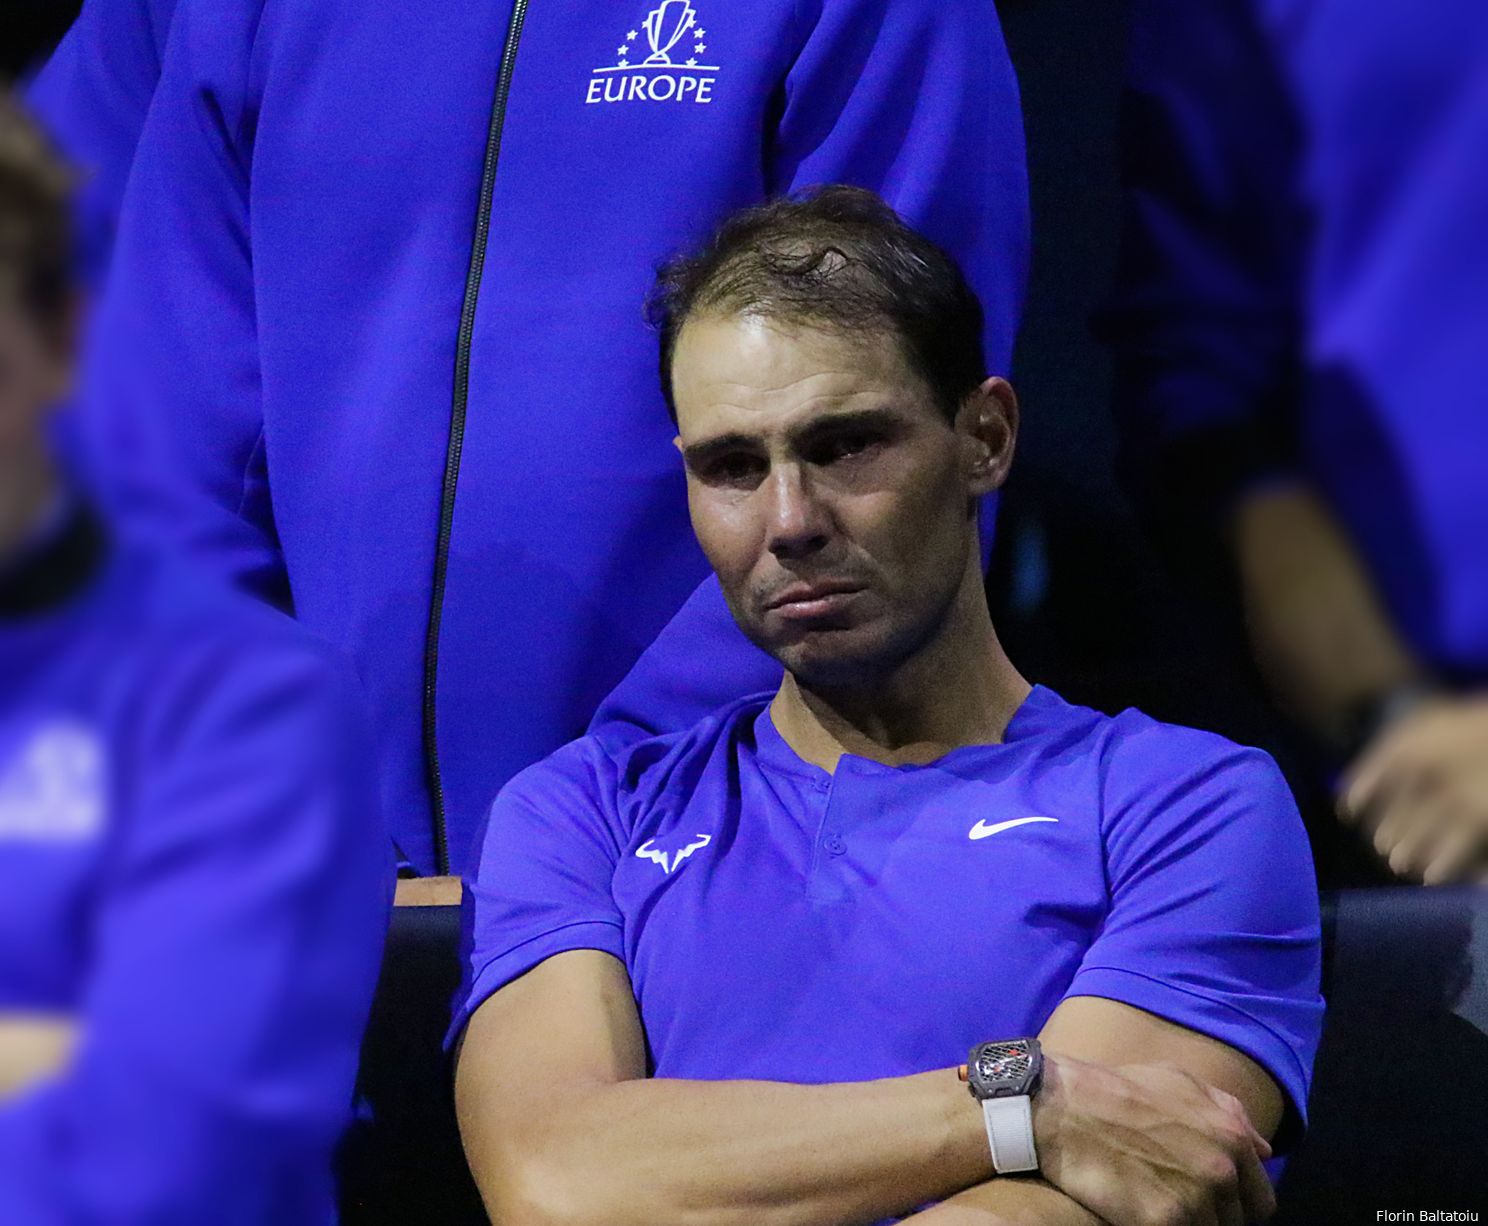 Rafa Nadal struggled to contain his emotions during Federer's final moments